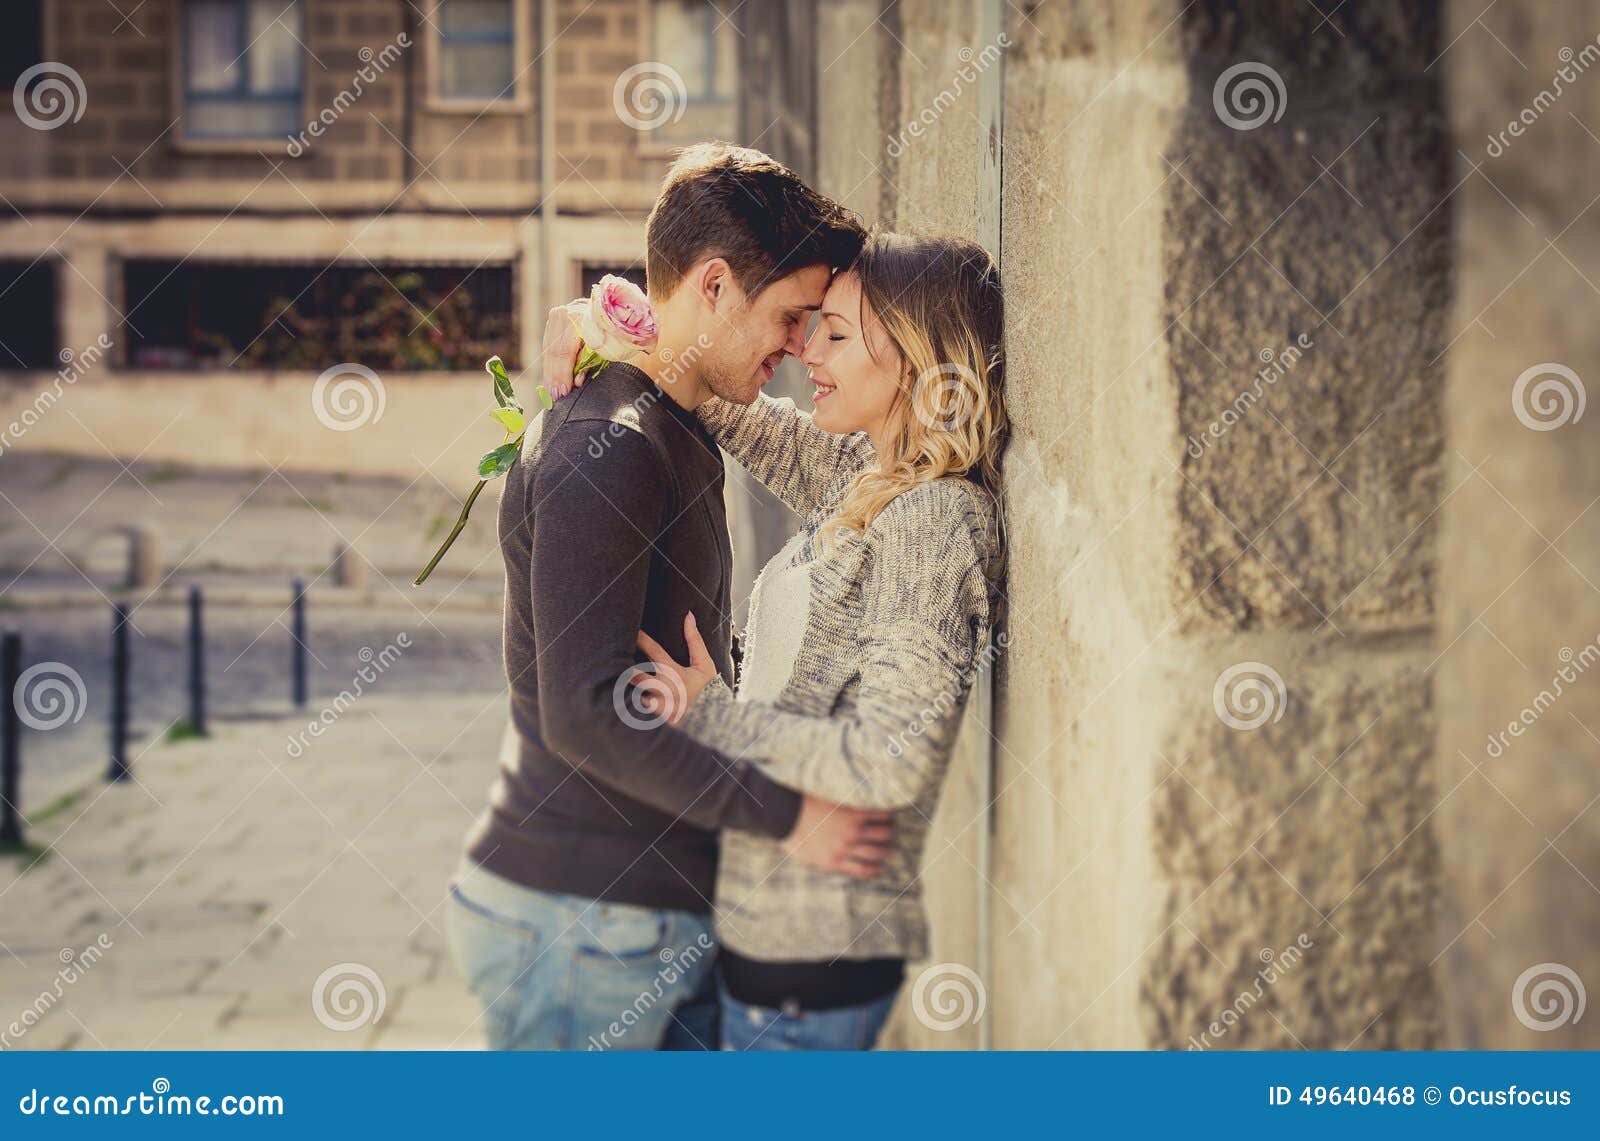 candid portrait of beautiful european couple with rose in love kissing on street alley celebrating valentines day